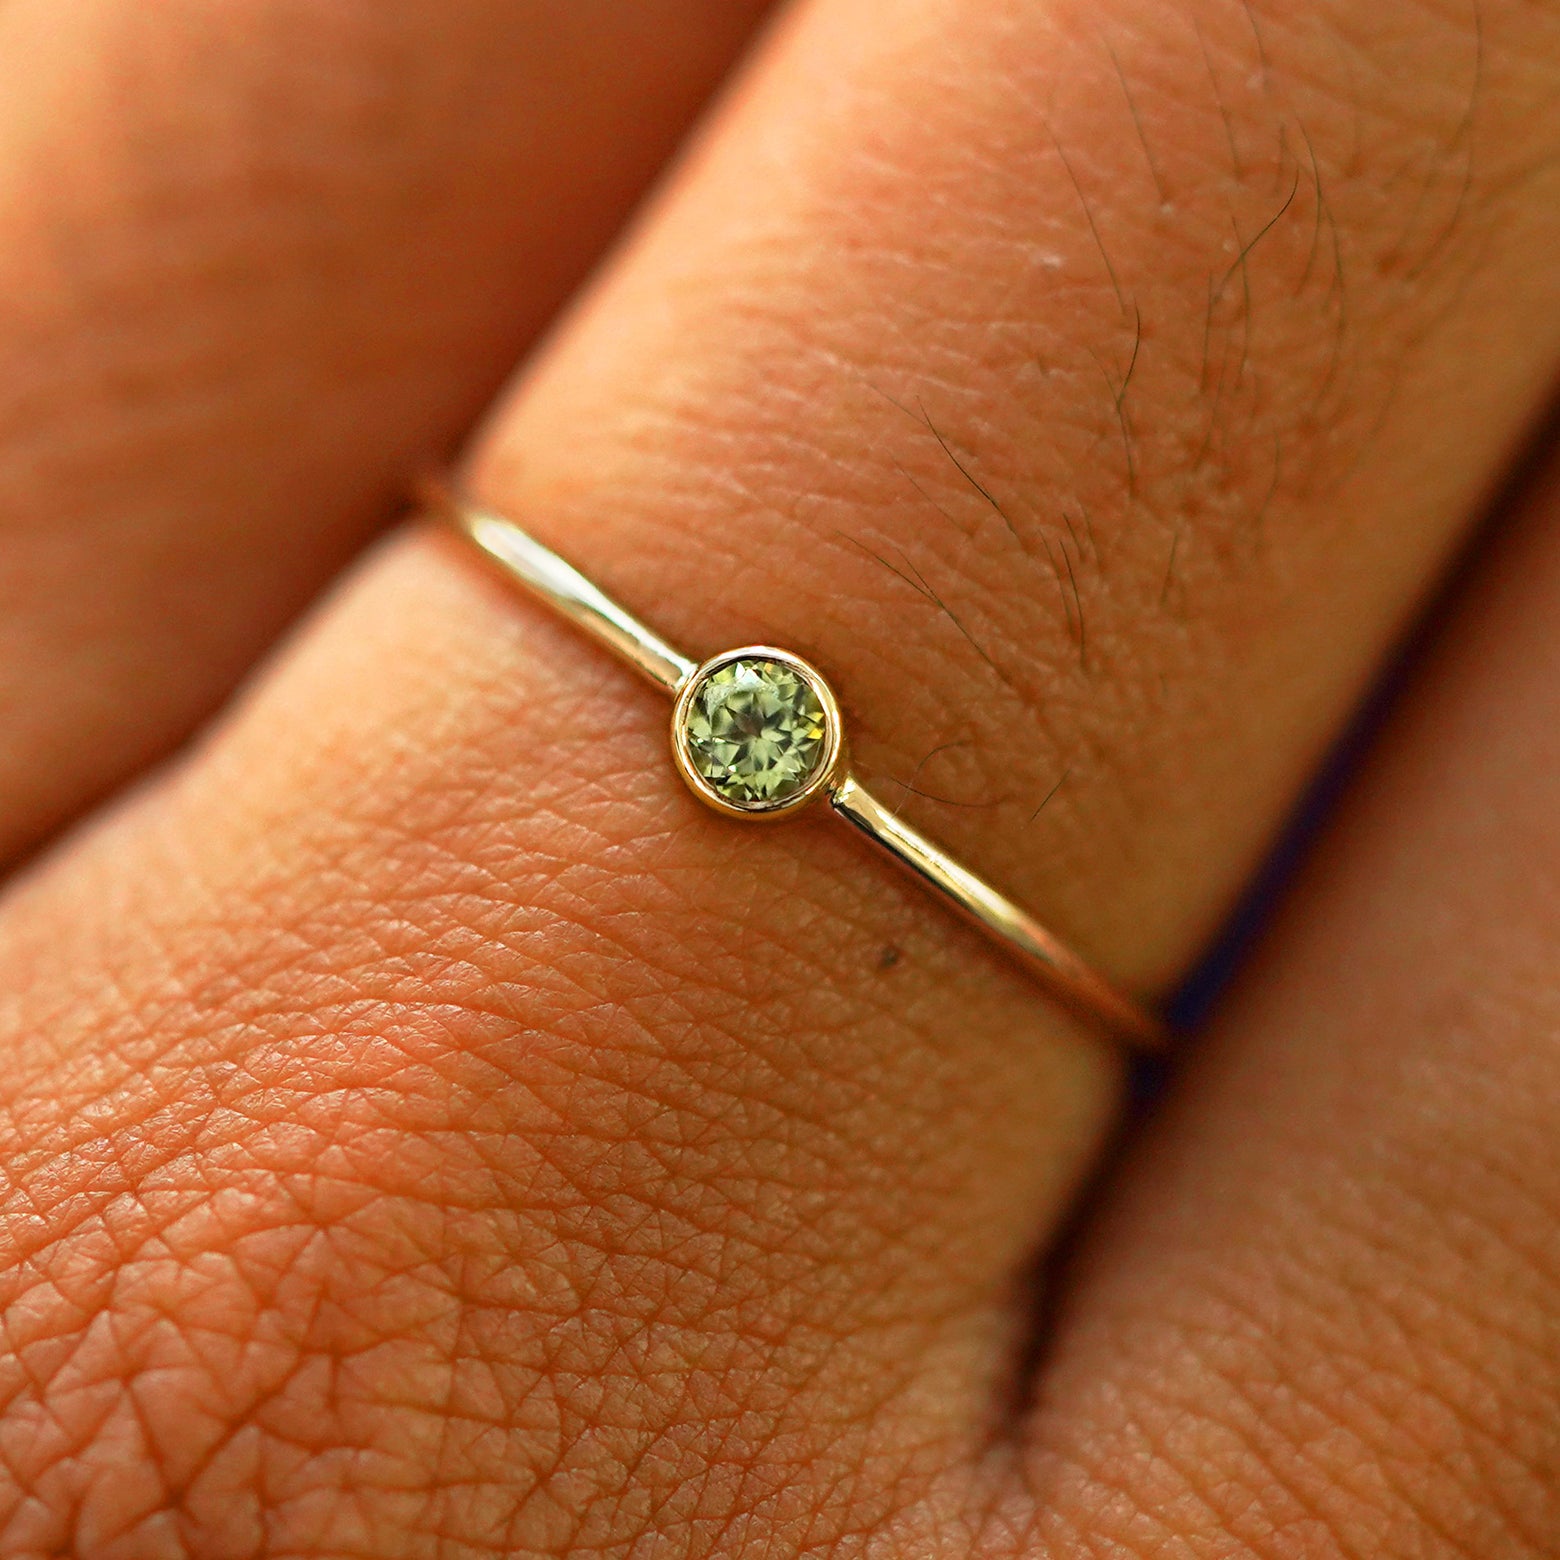 Close up view of a model's fingers wearing a solid yellow gold gemstone Peridot Ring